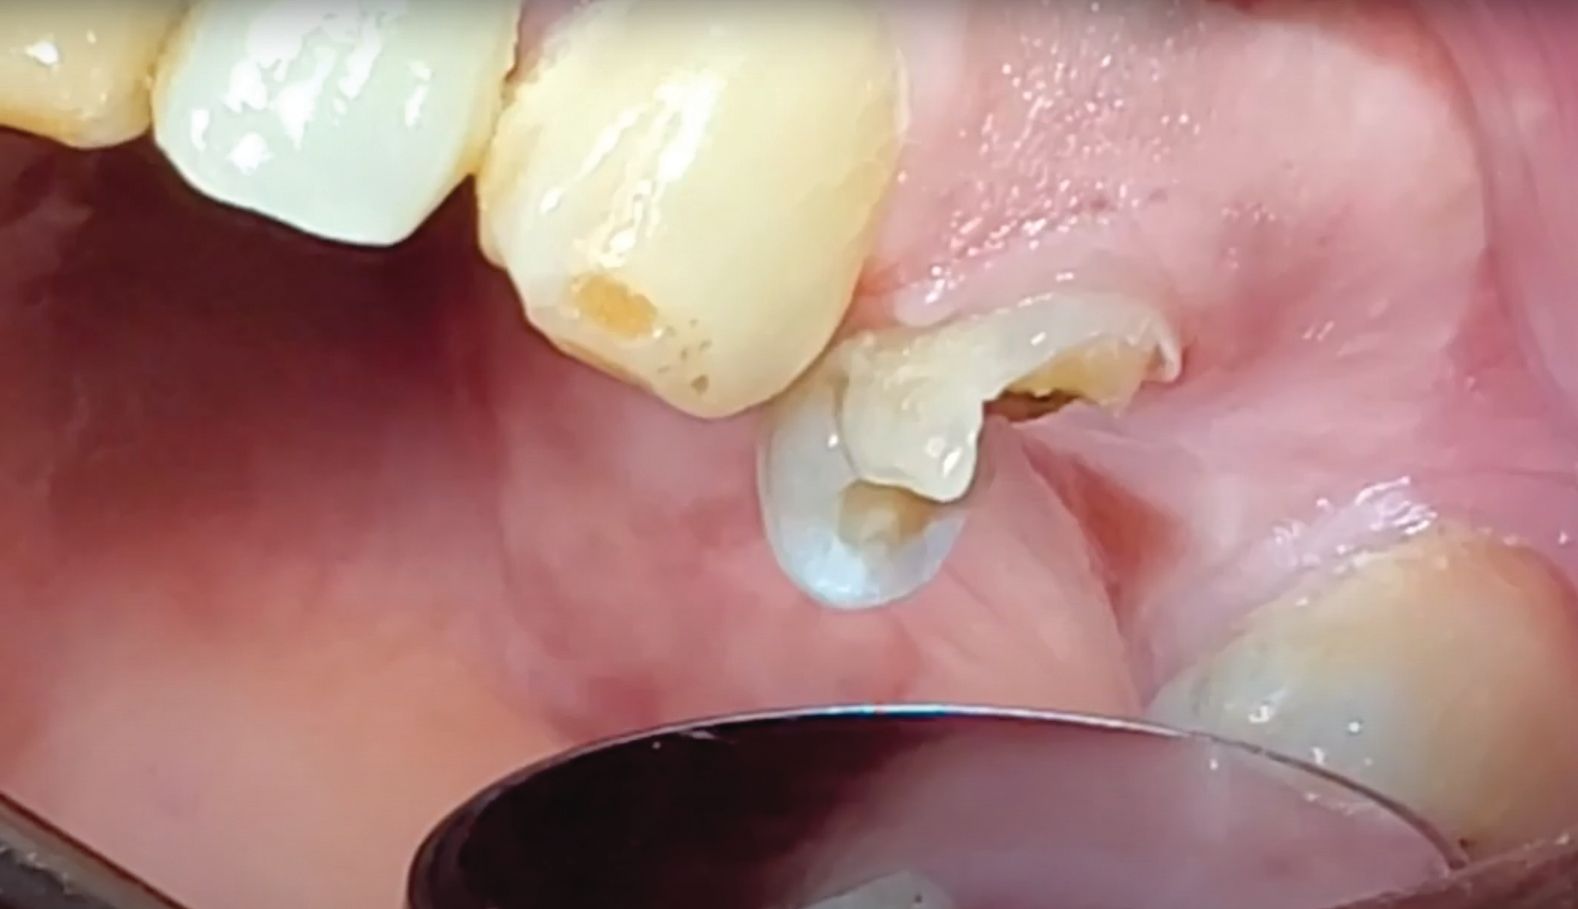 A fractured tooth with the damaged amalgam restoration removed.